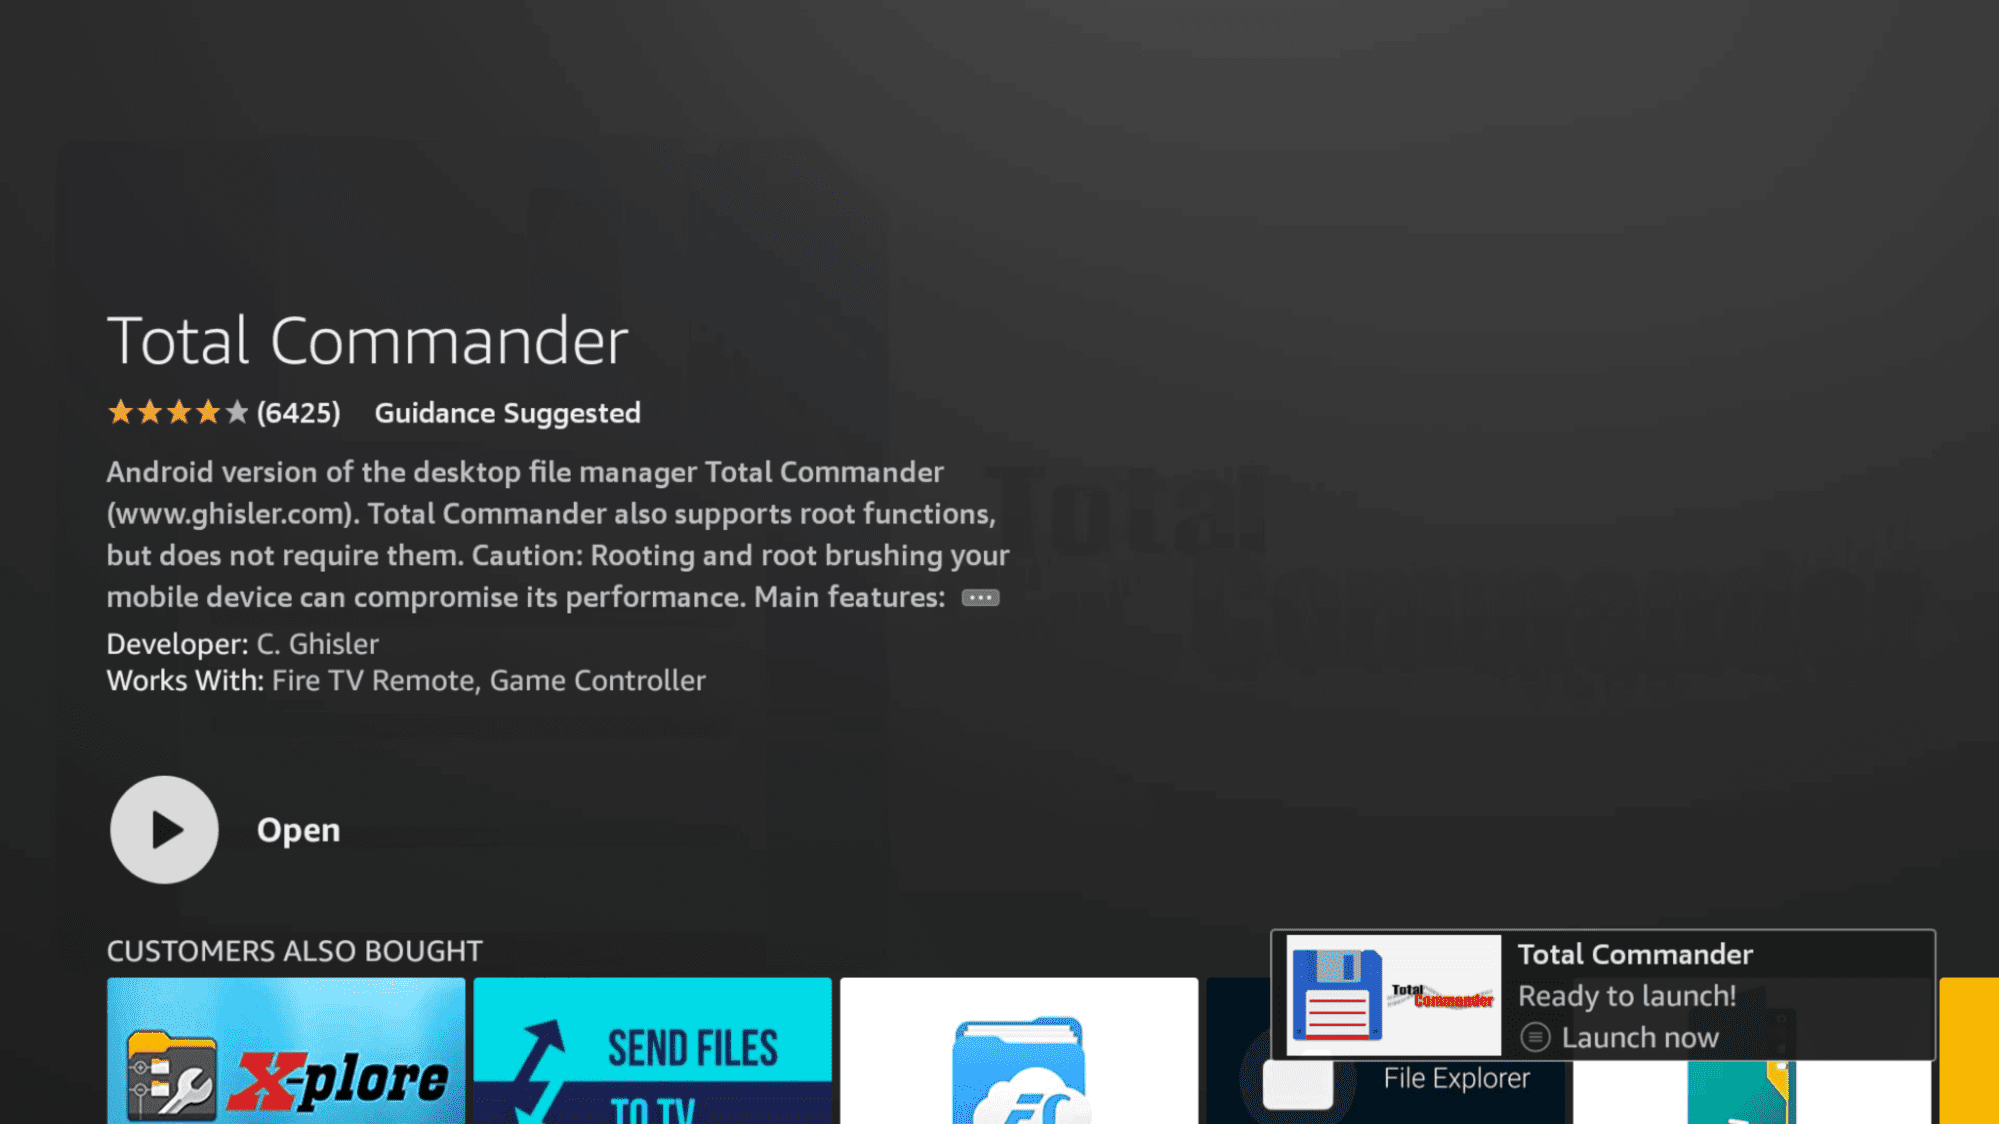 Total Commander is another option for Fire TV sideloaders